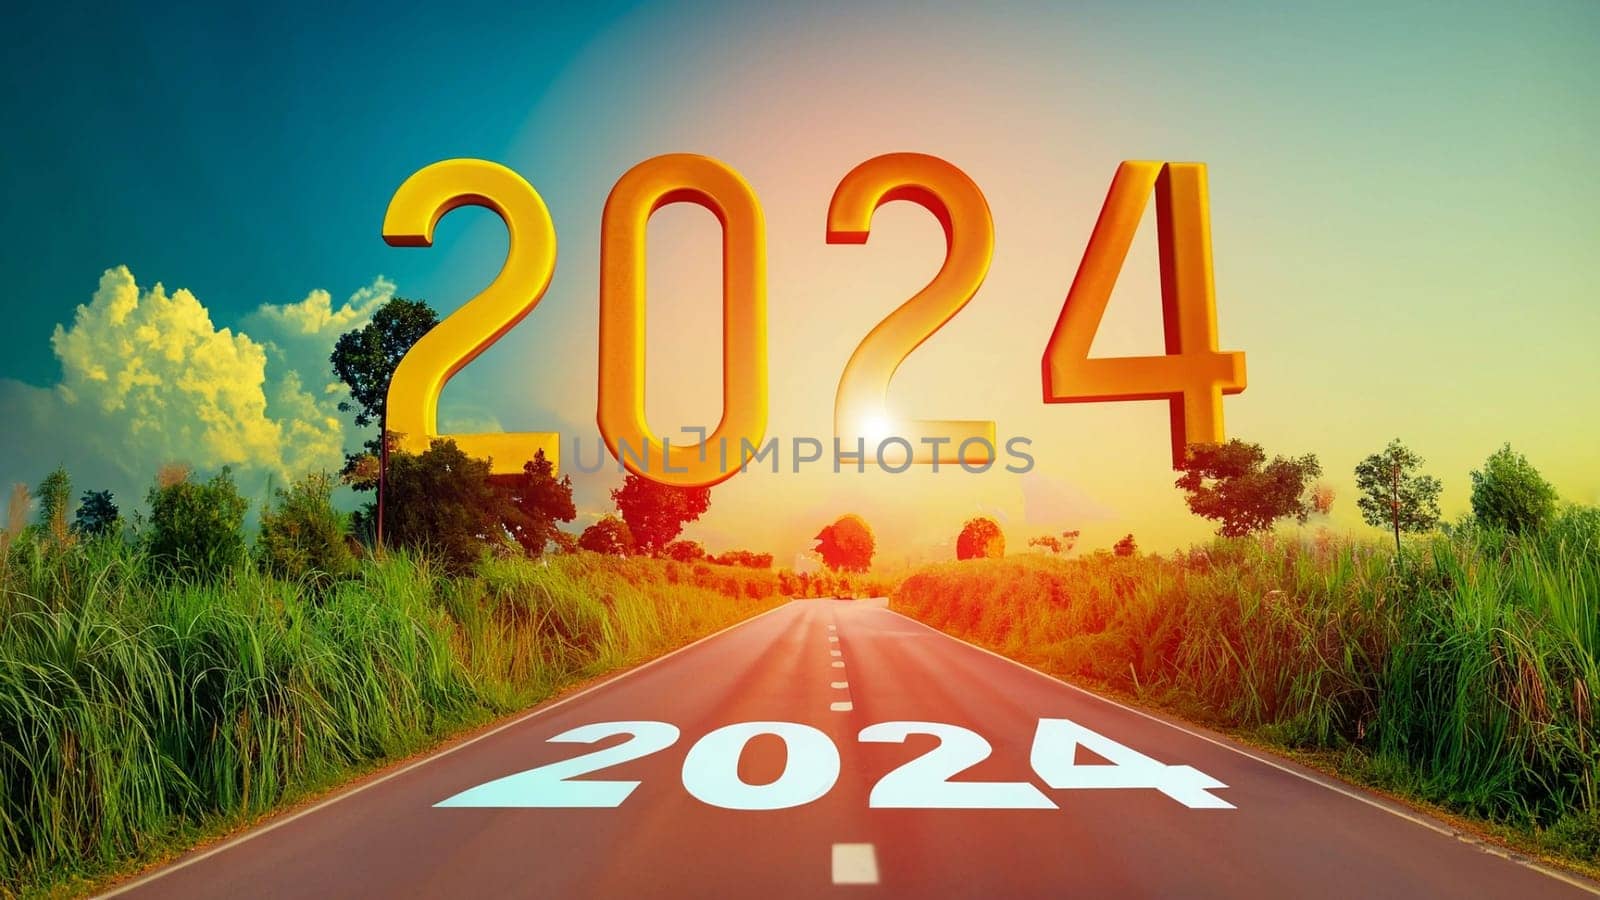 go forward concept. passing time future, life plan change, work start run line, sunset hope growth begin. Open empty road path end and new year 2024. Upcoming 2024 goals and leaving behind 2023 year. High quality image